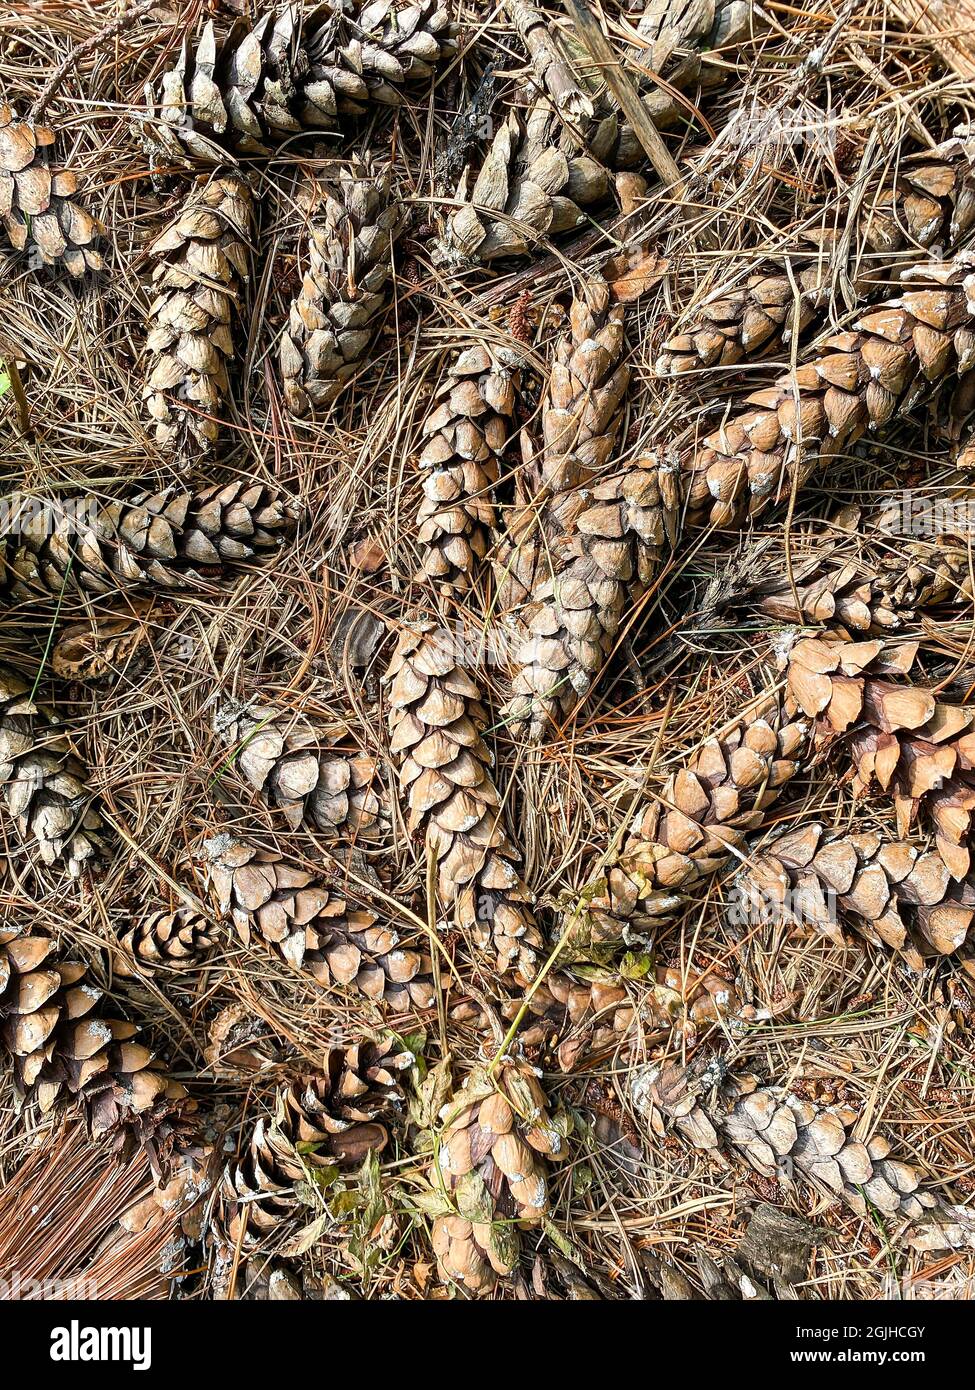 fallen brown pine cones with dry pine needles on the ground in a coniferous forest. closeup view Stock Photo